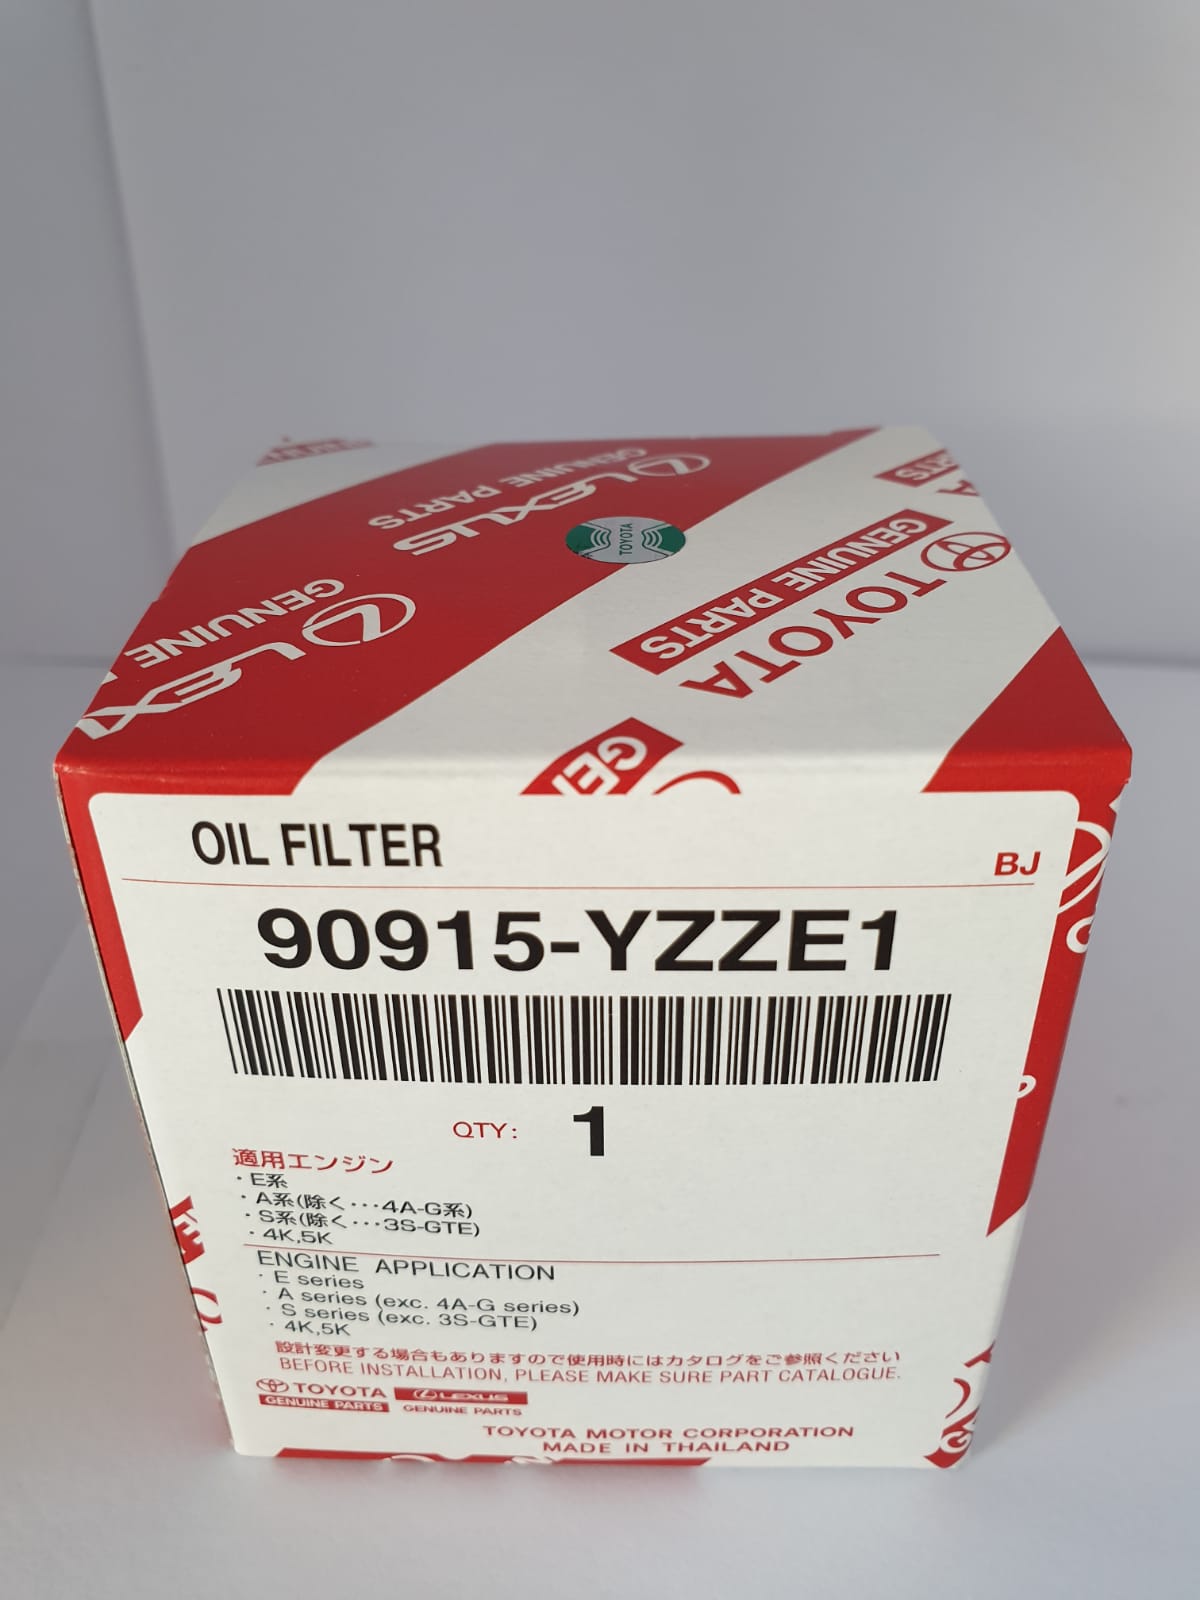 Toyota Oil Filter Application Chart